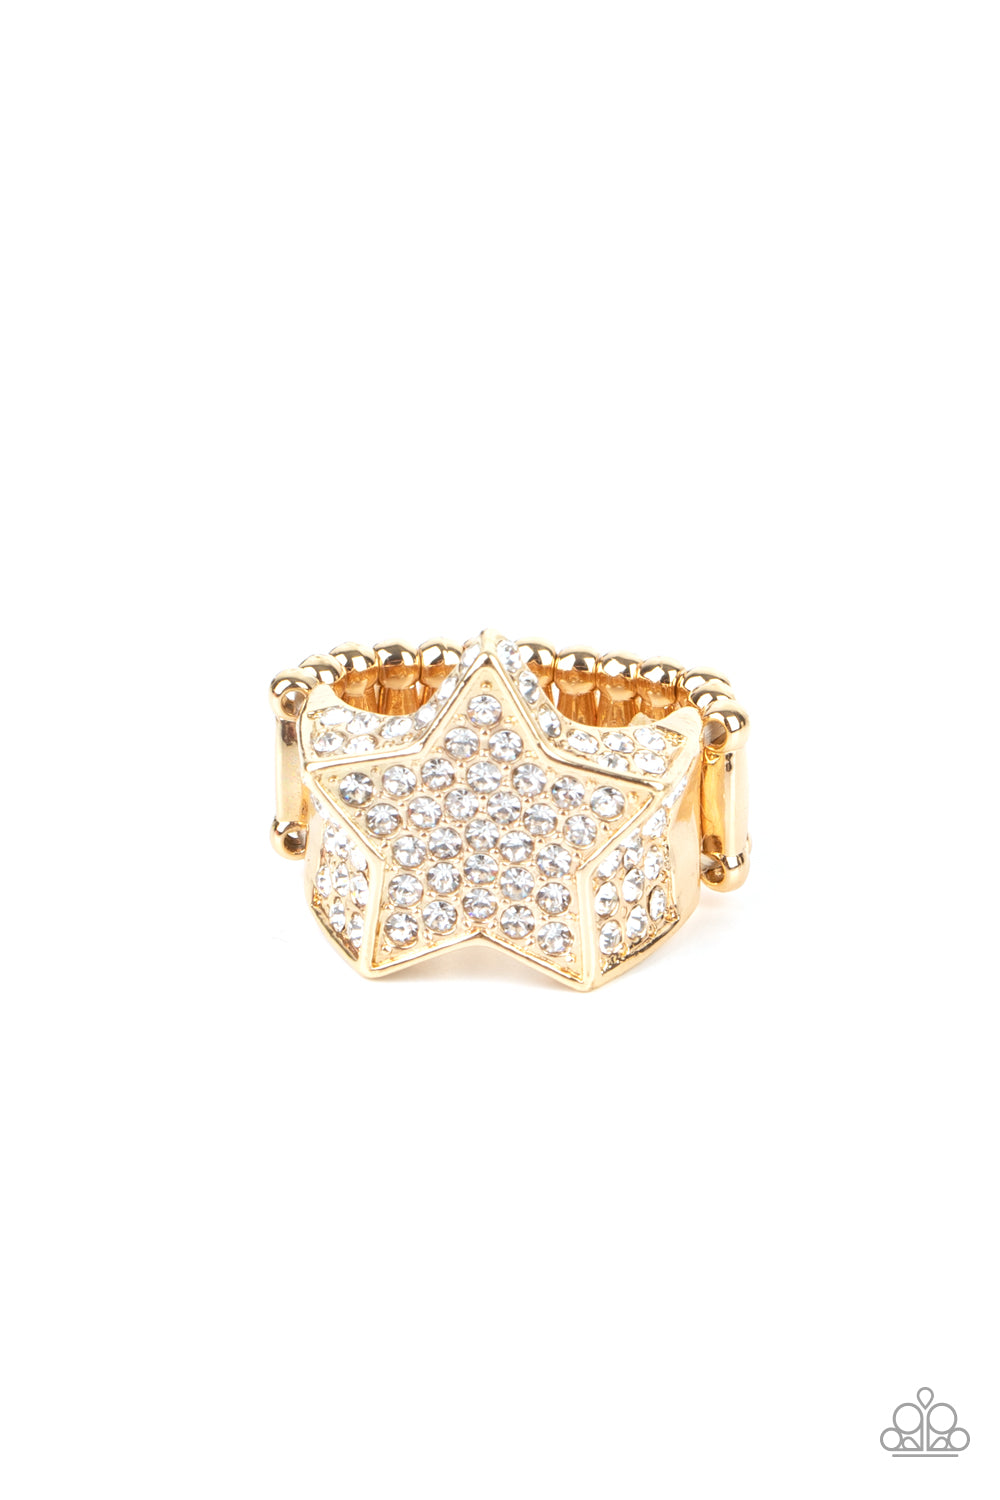 Here Come The Fireworks - Gold Ring - Princess Glam Shop